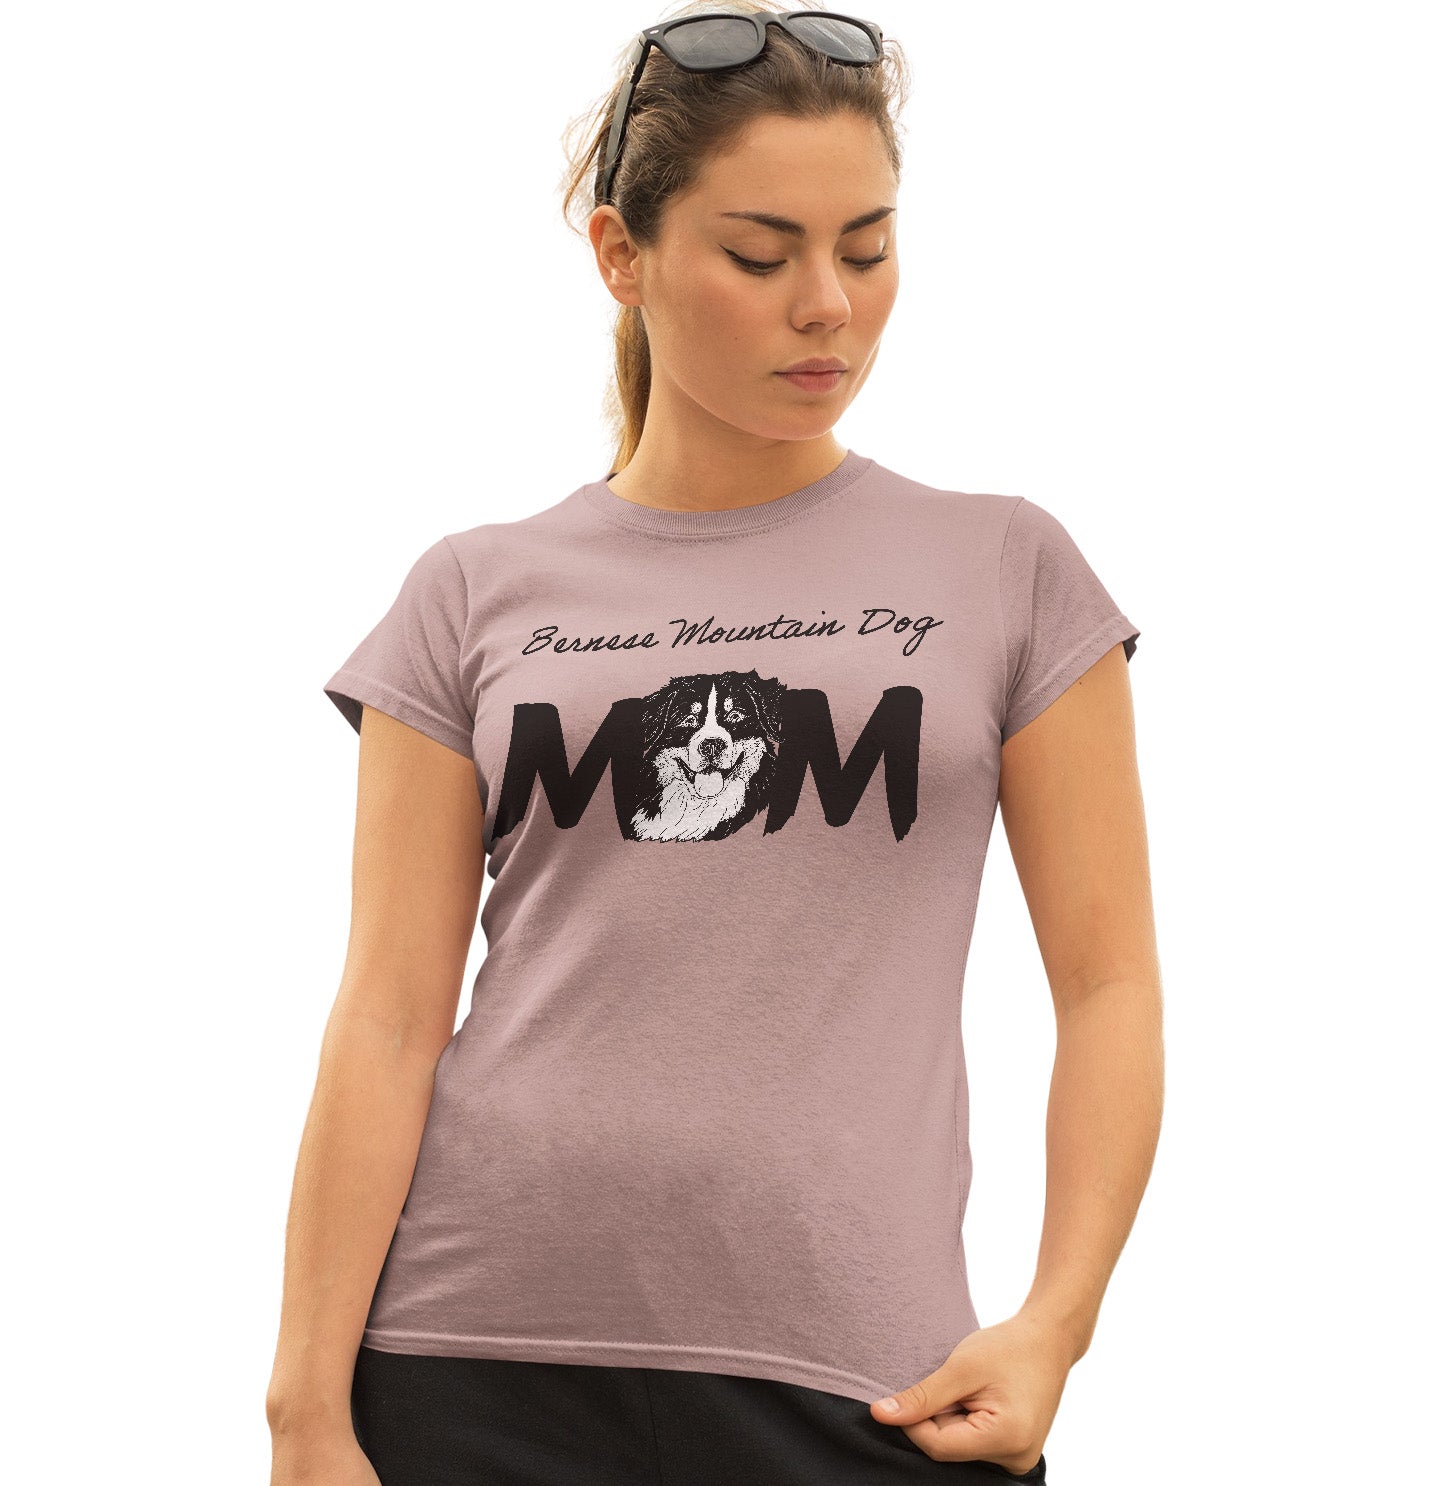 Bernese Mountain Dog Breed Mom - Women's Fitted T-Shirt